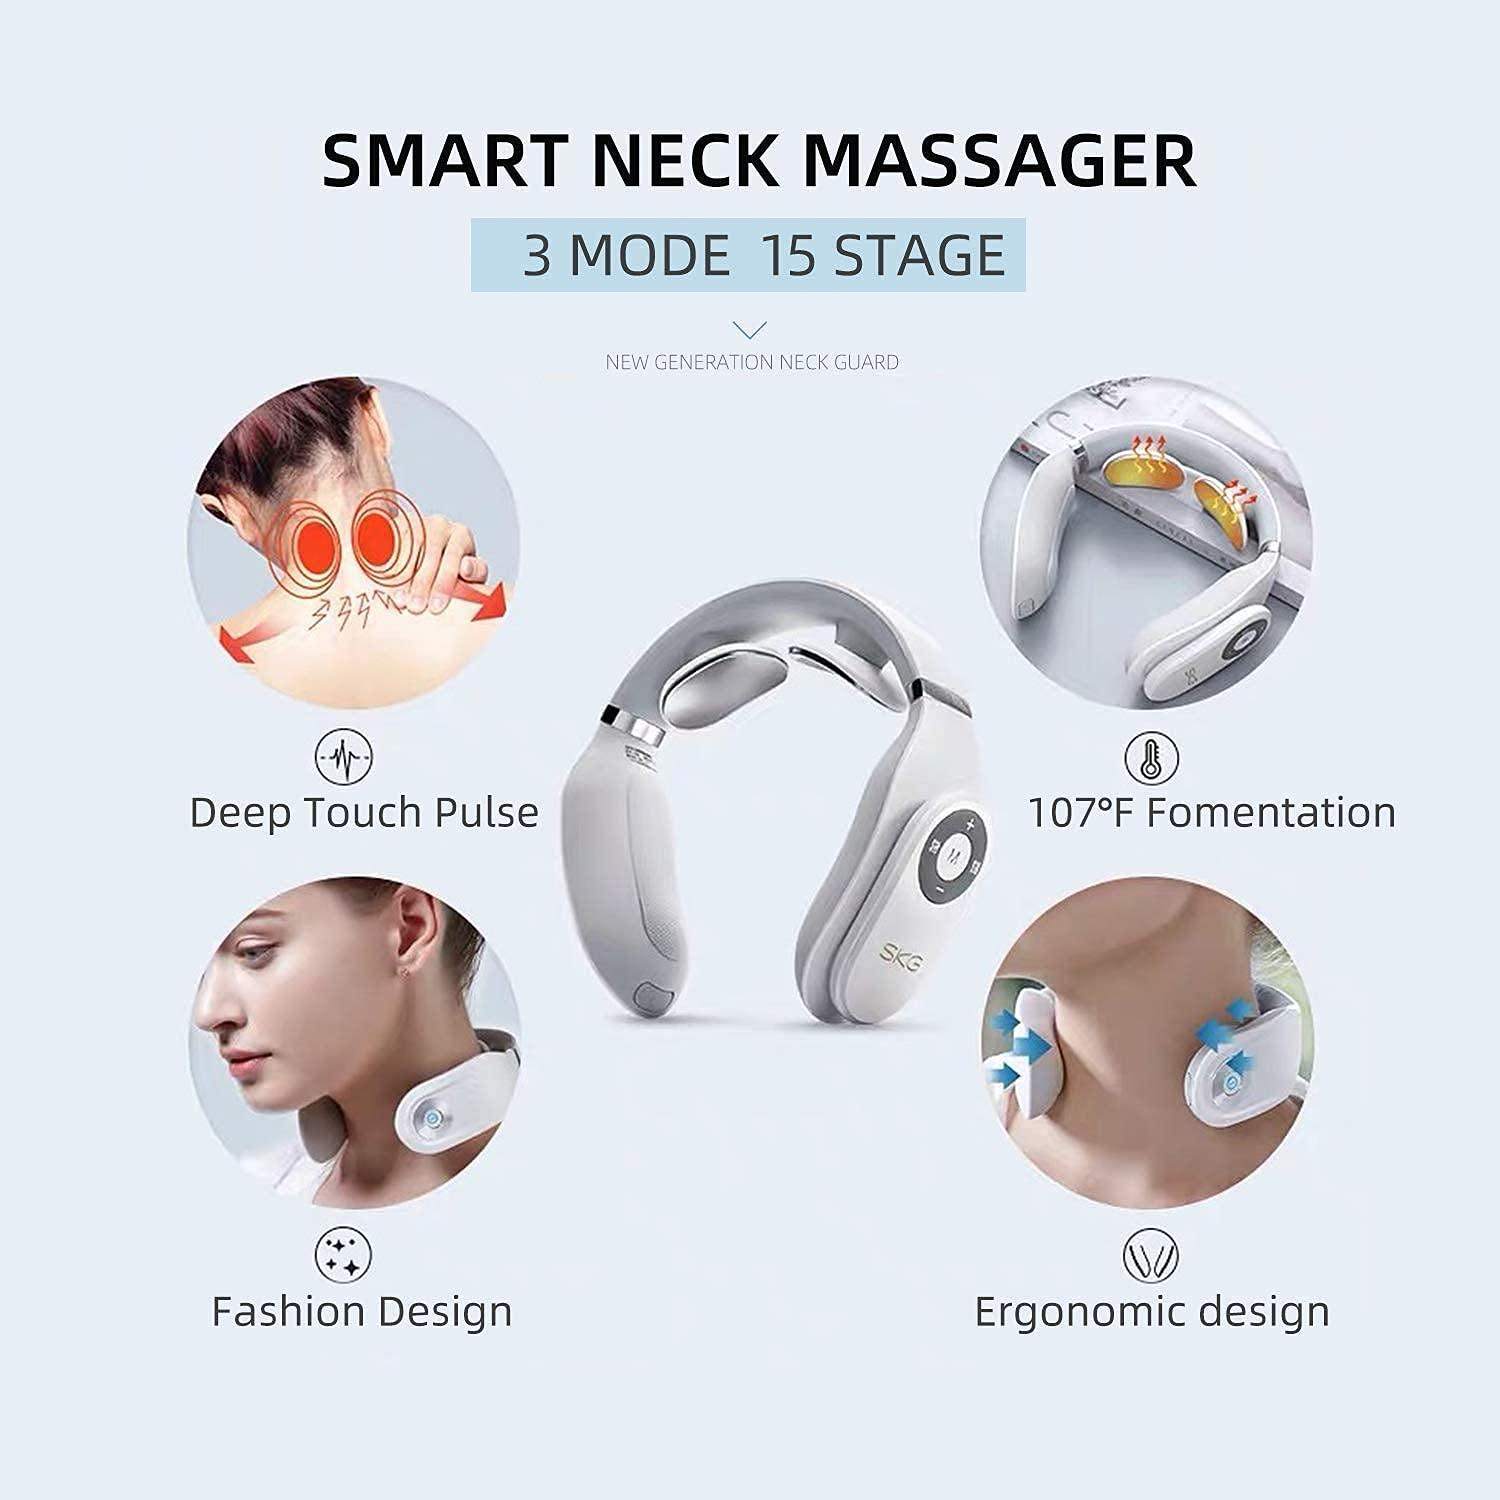 SKG 4098E Cordless Pulse Neck Massager with Heat for Pain Relief - SKG